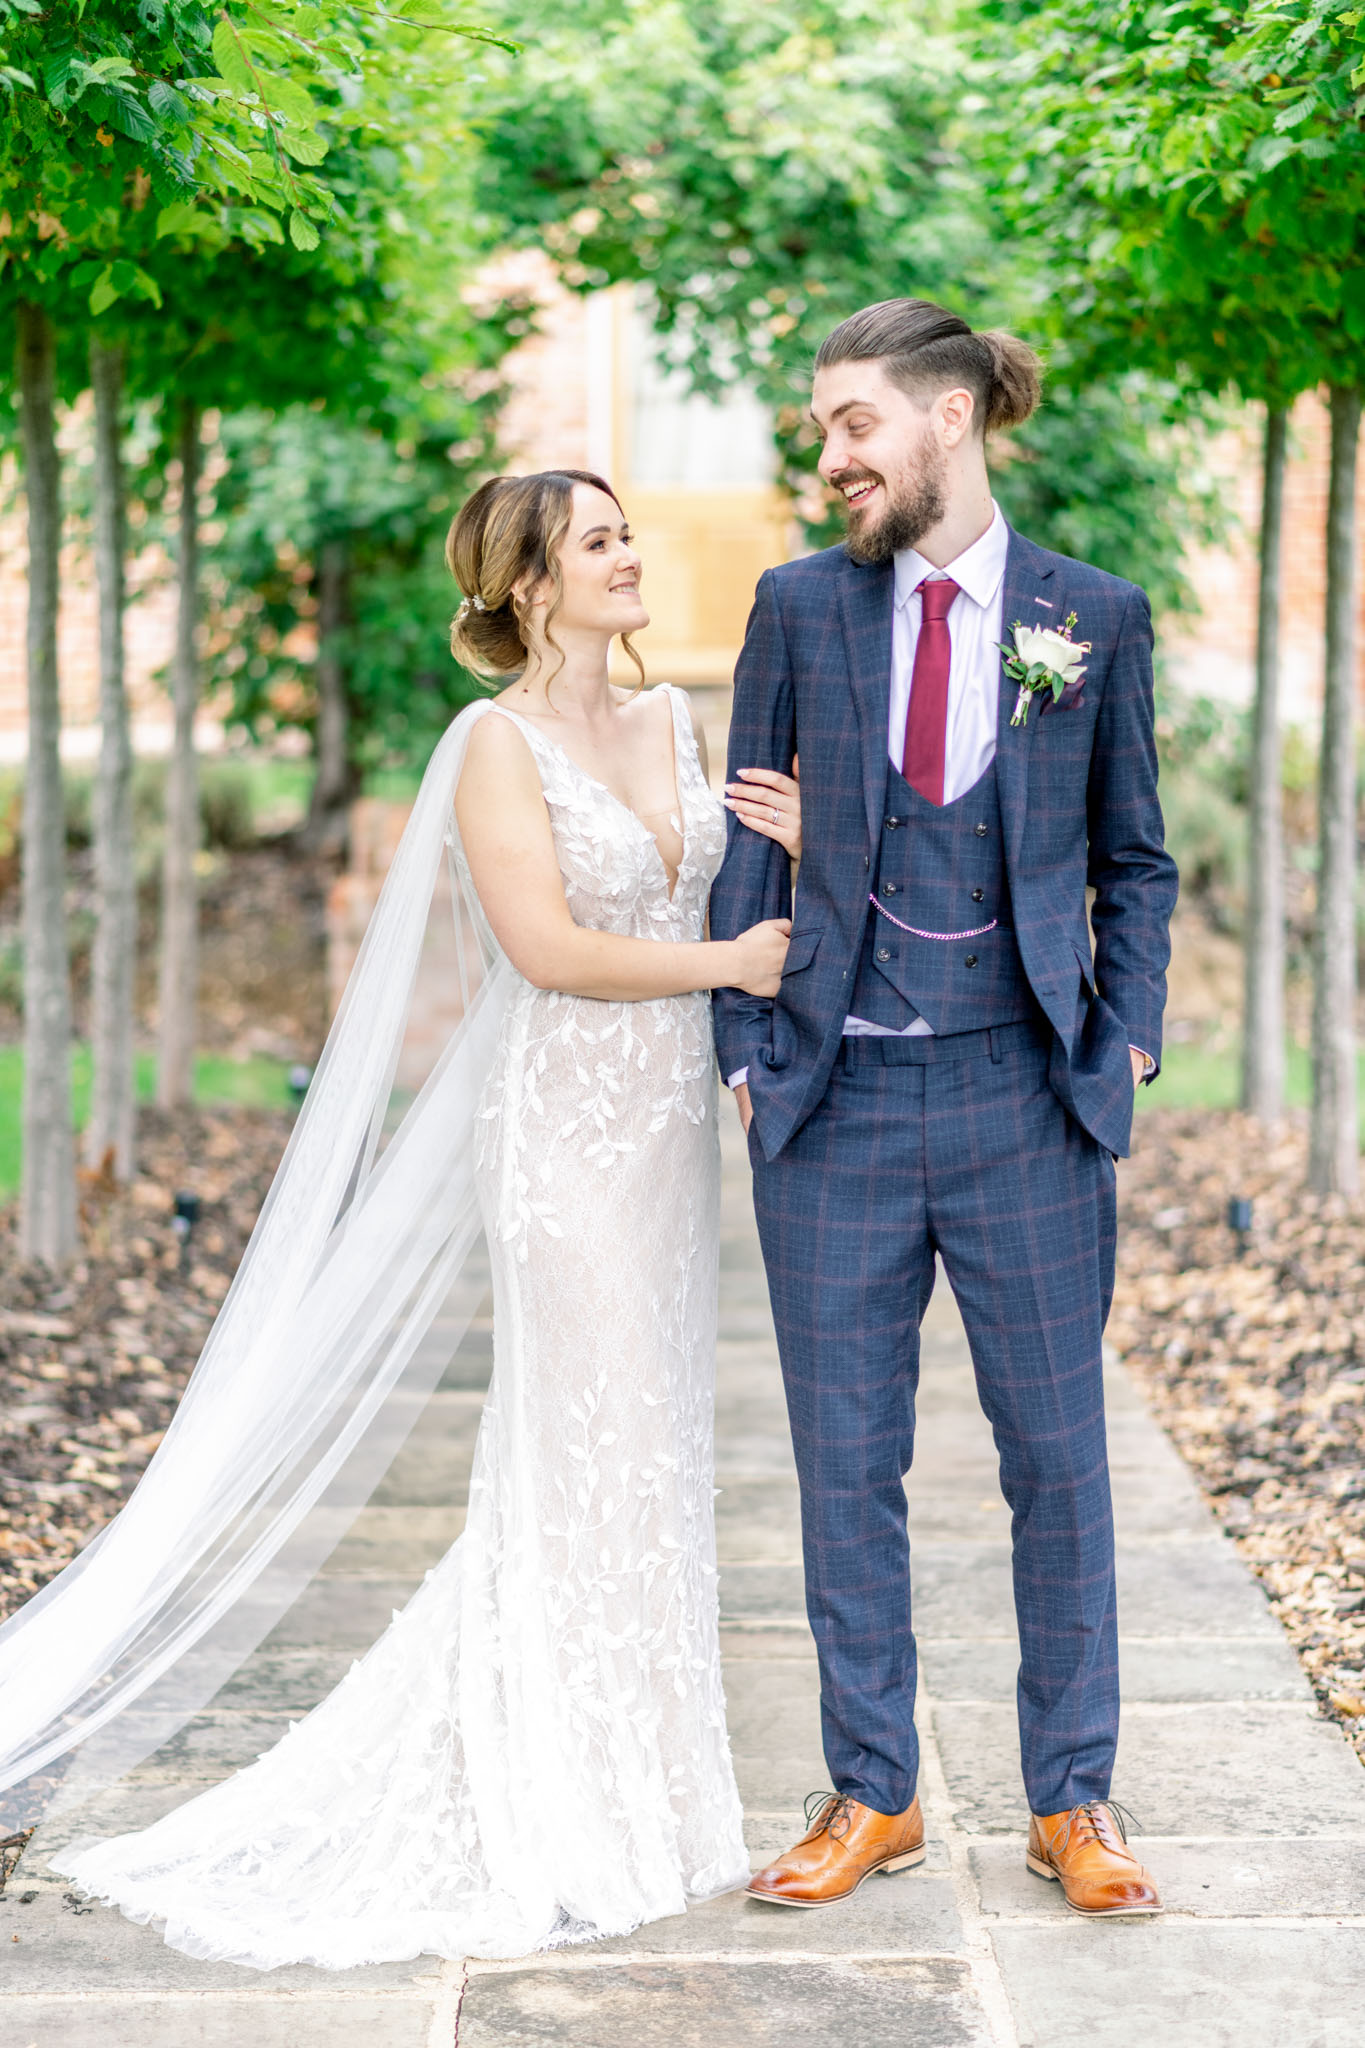 https://usercontent.one/wp/www.natalieandmax.co.uk/wp-content/uploads/2022/09/L-J-Natalie-and-Max-Photo-and-Films-Hatfield-Place-Wedding-Photography-484.jpg?media=1711985334